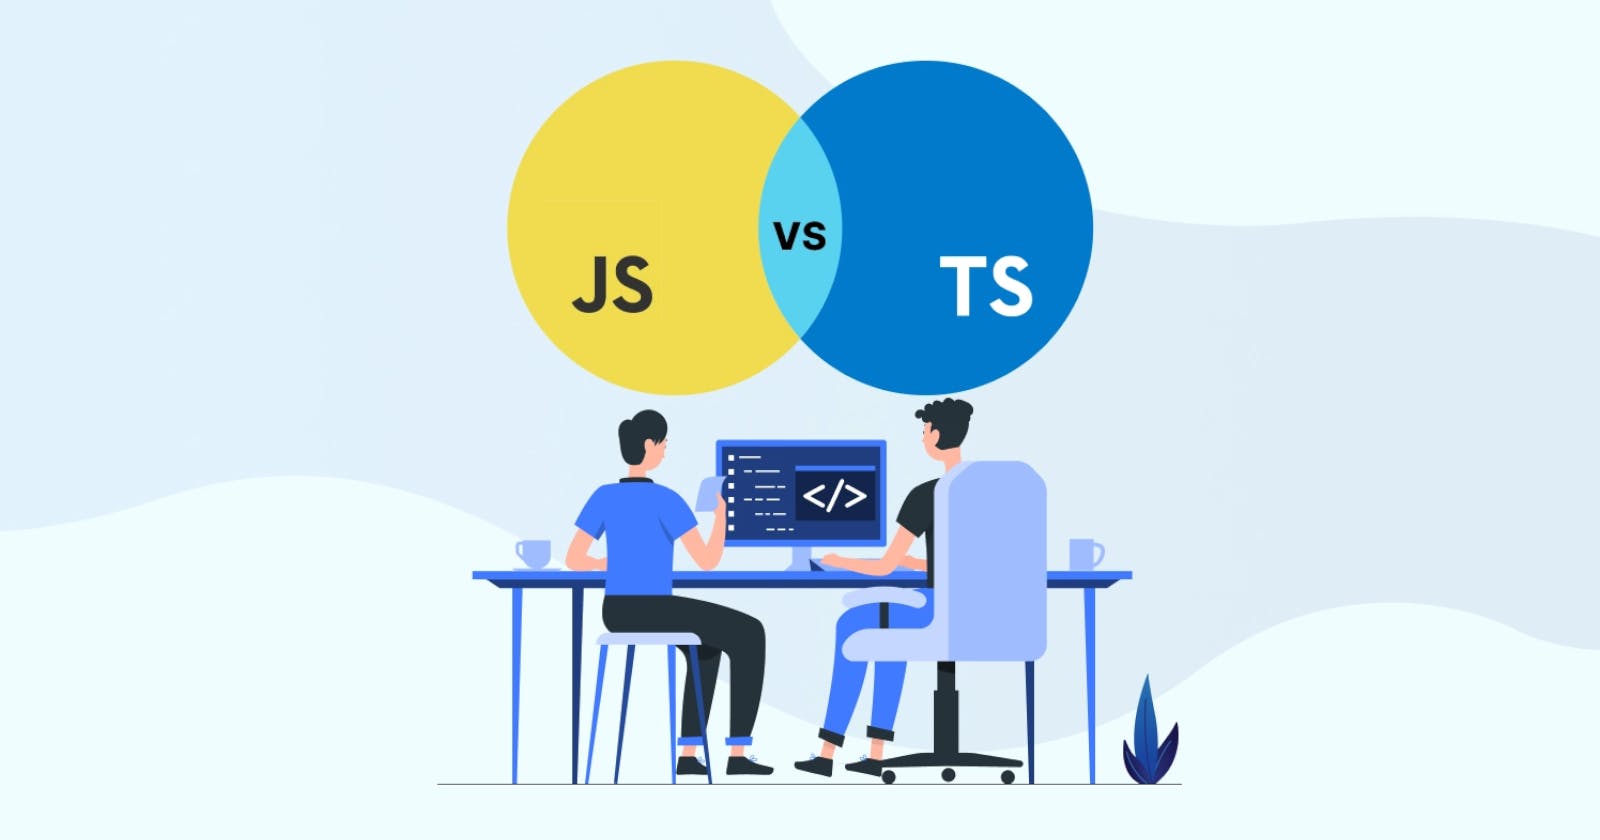 Will you use TypeScript in your project instead of JSX?